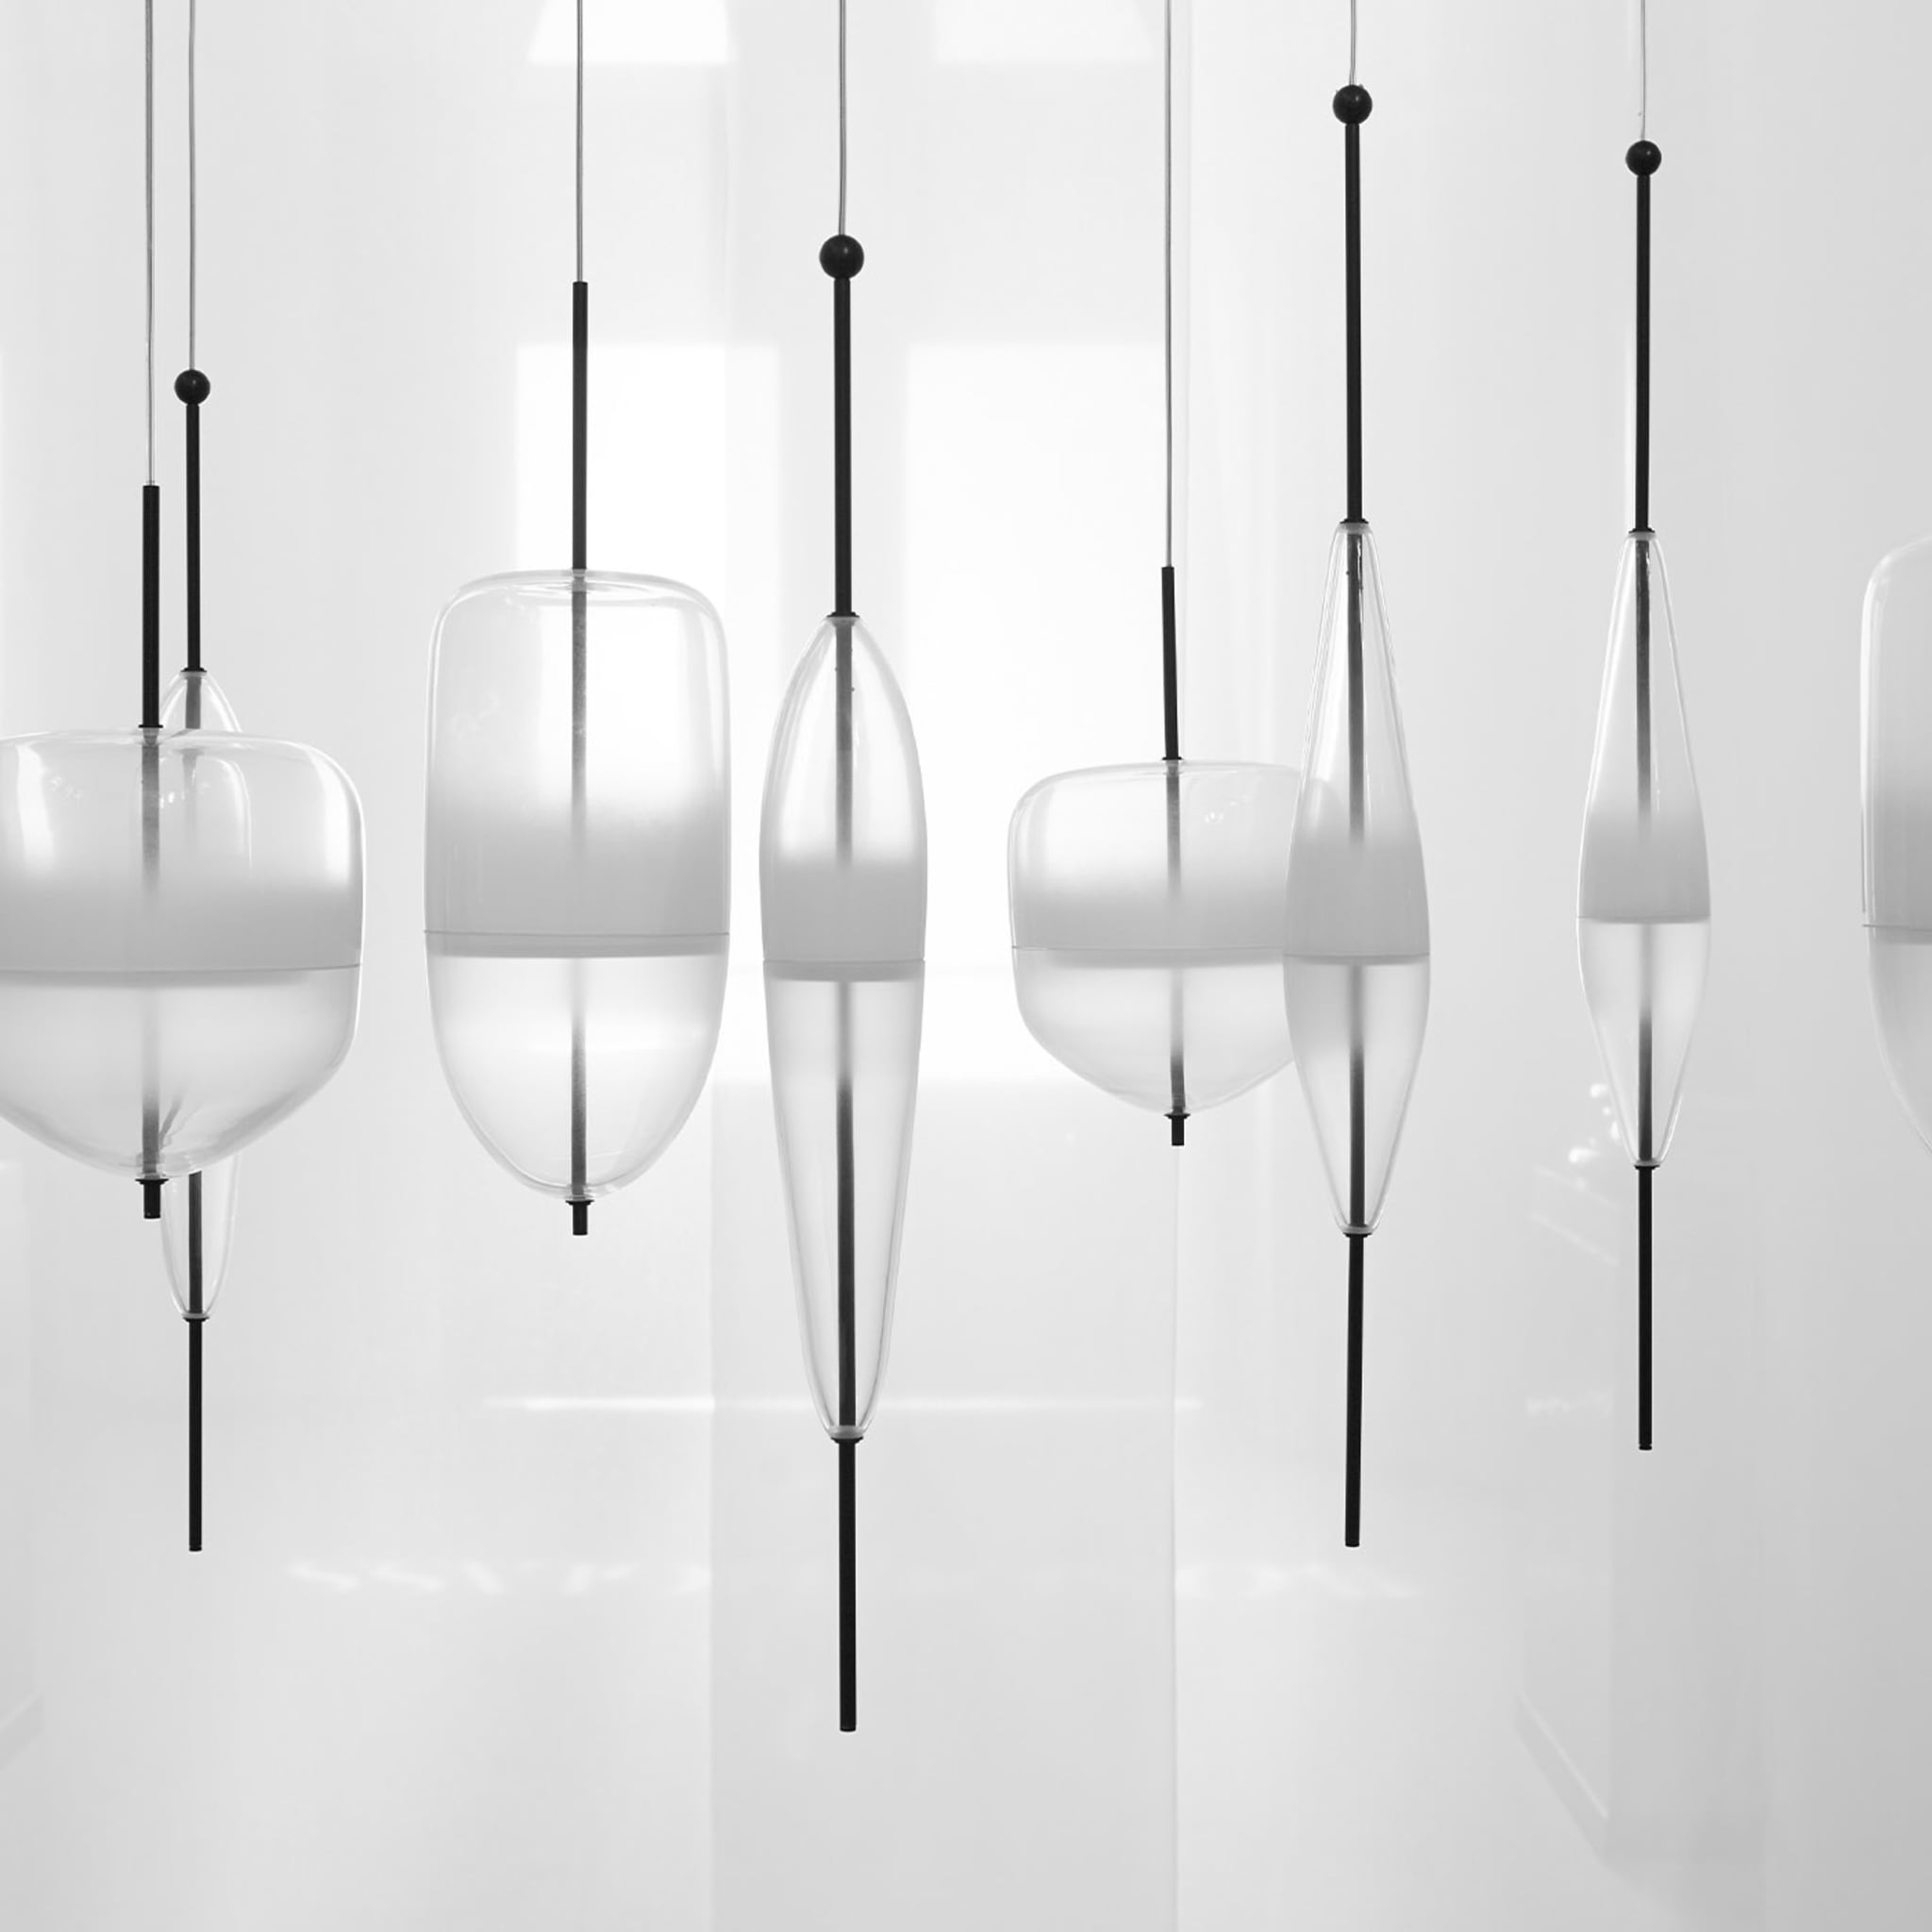 Flow[T] S3 Off White Pendant Lamp by Nao Tamura - Alternative view 1